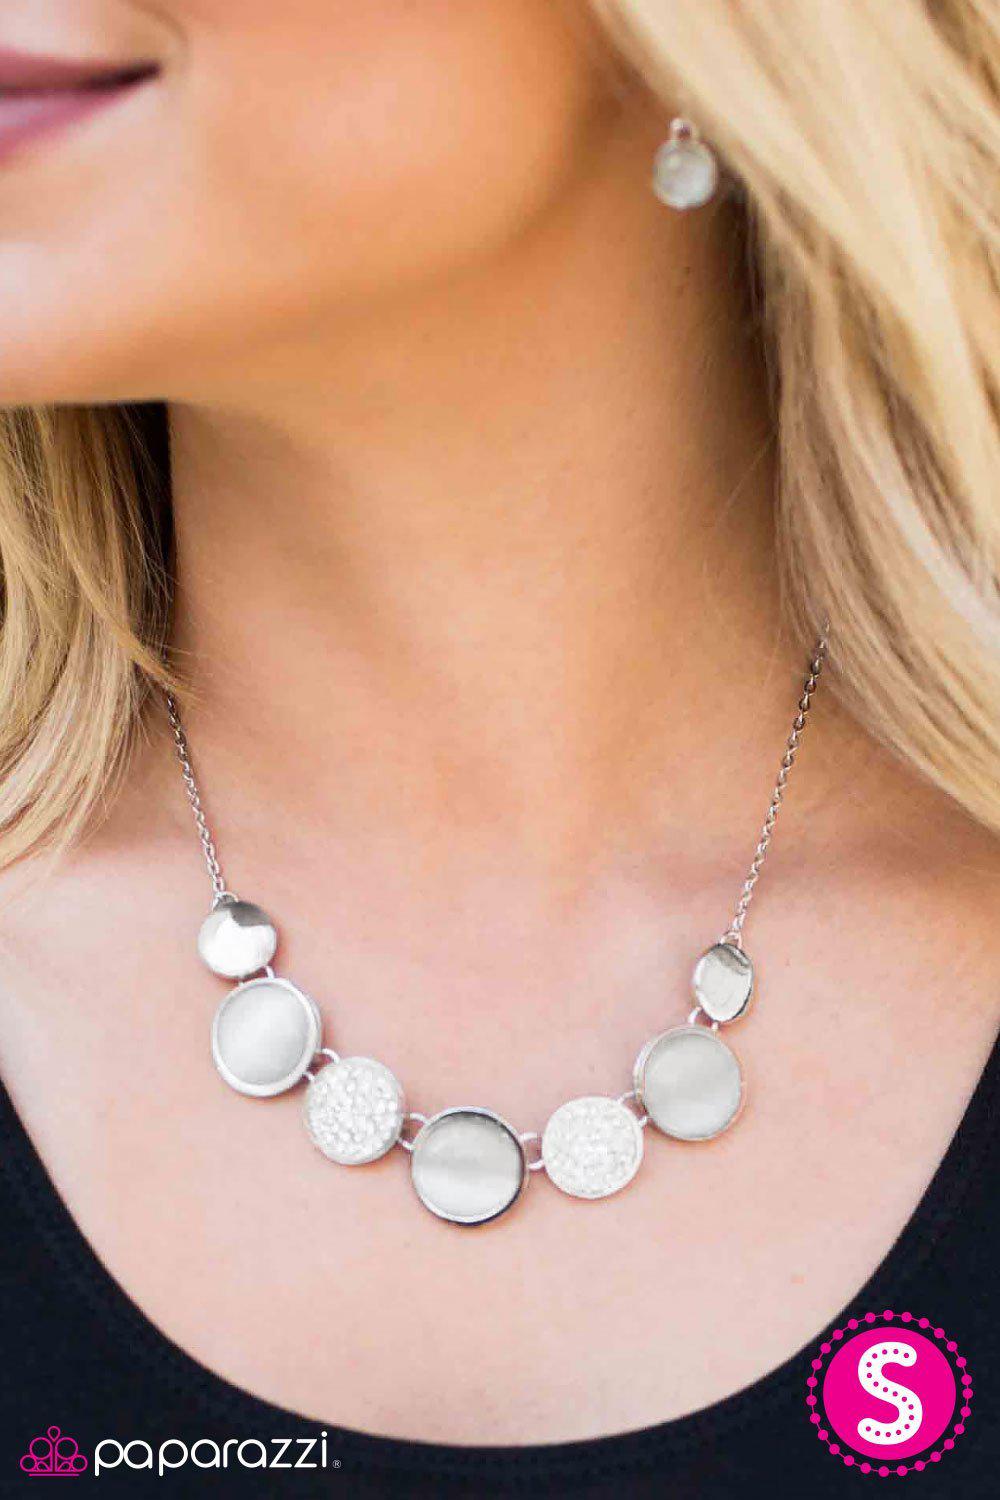 Keep Calm and Sparkle On White Moonstone Necklace and matching Earrings - Paparazzi Accessories-CarasShop.com - $5 Jewelry by Cara Jewels